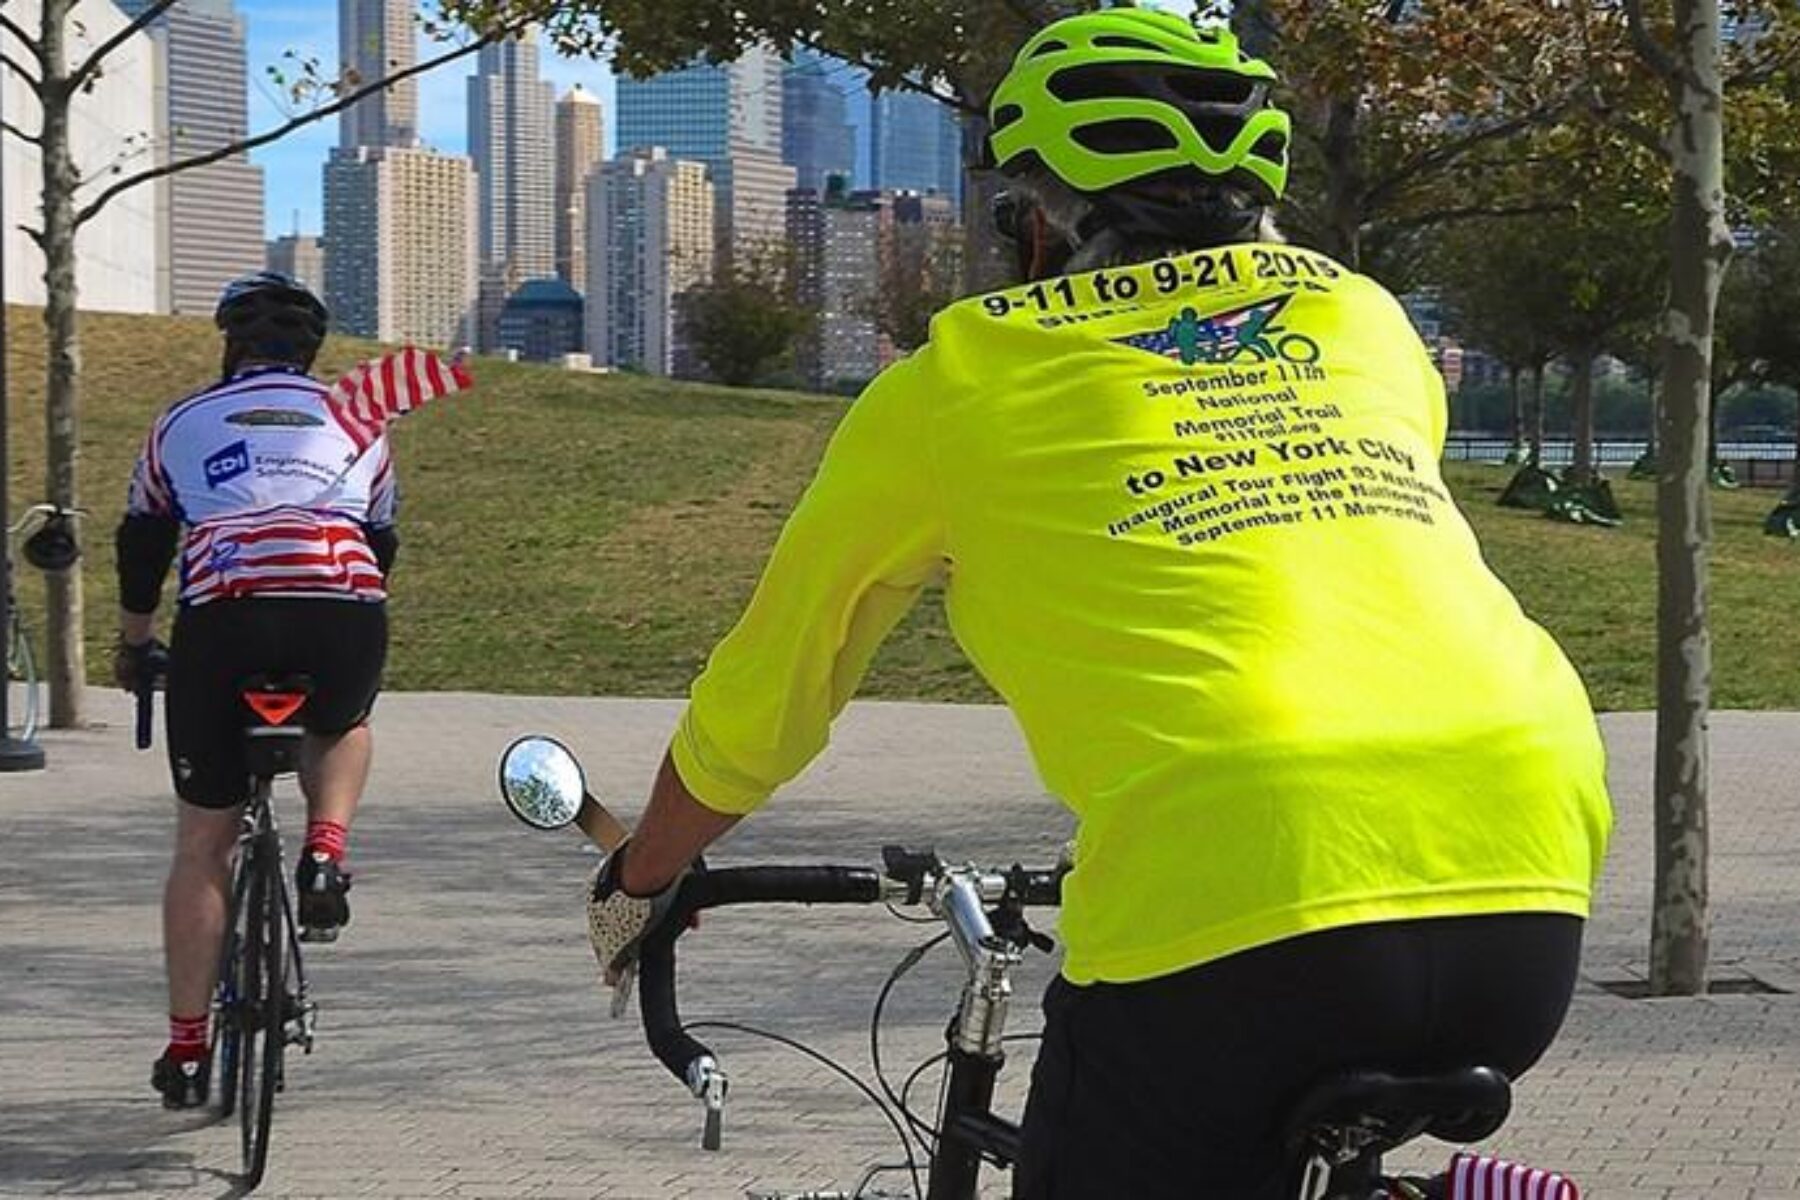 Inaugural September 11th National Memorial Trail Alliance ride, Liberty State Park, Sept. 10, 2015 | Photo by Gail Zavian